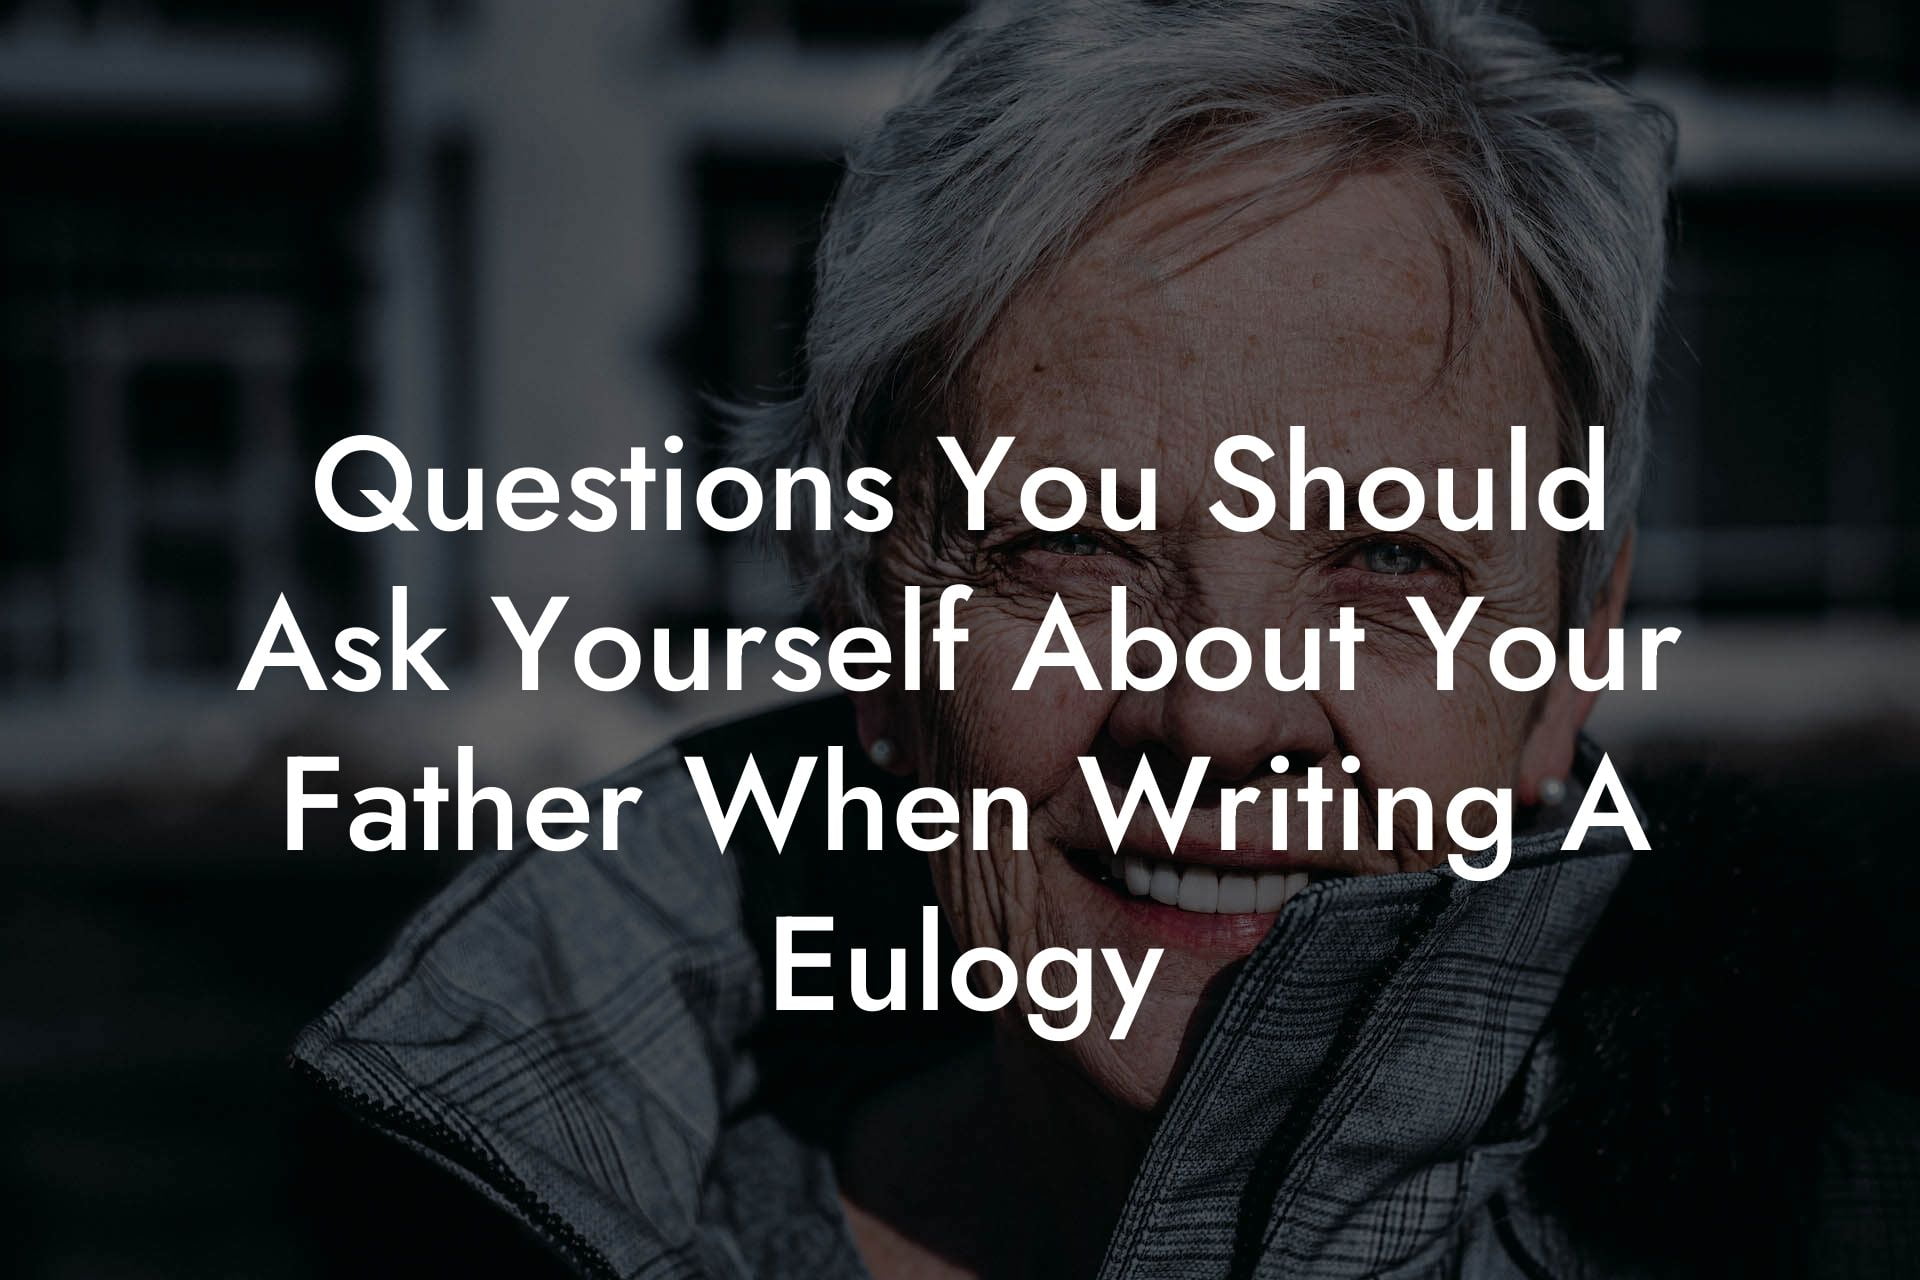 Questions You Should Ask Yourself About Your Father When Writing A Eulogy